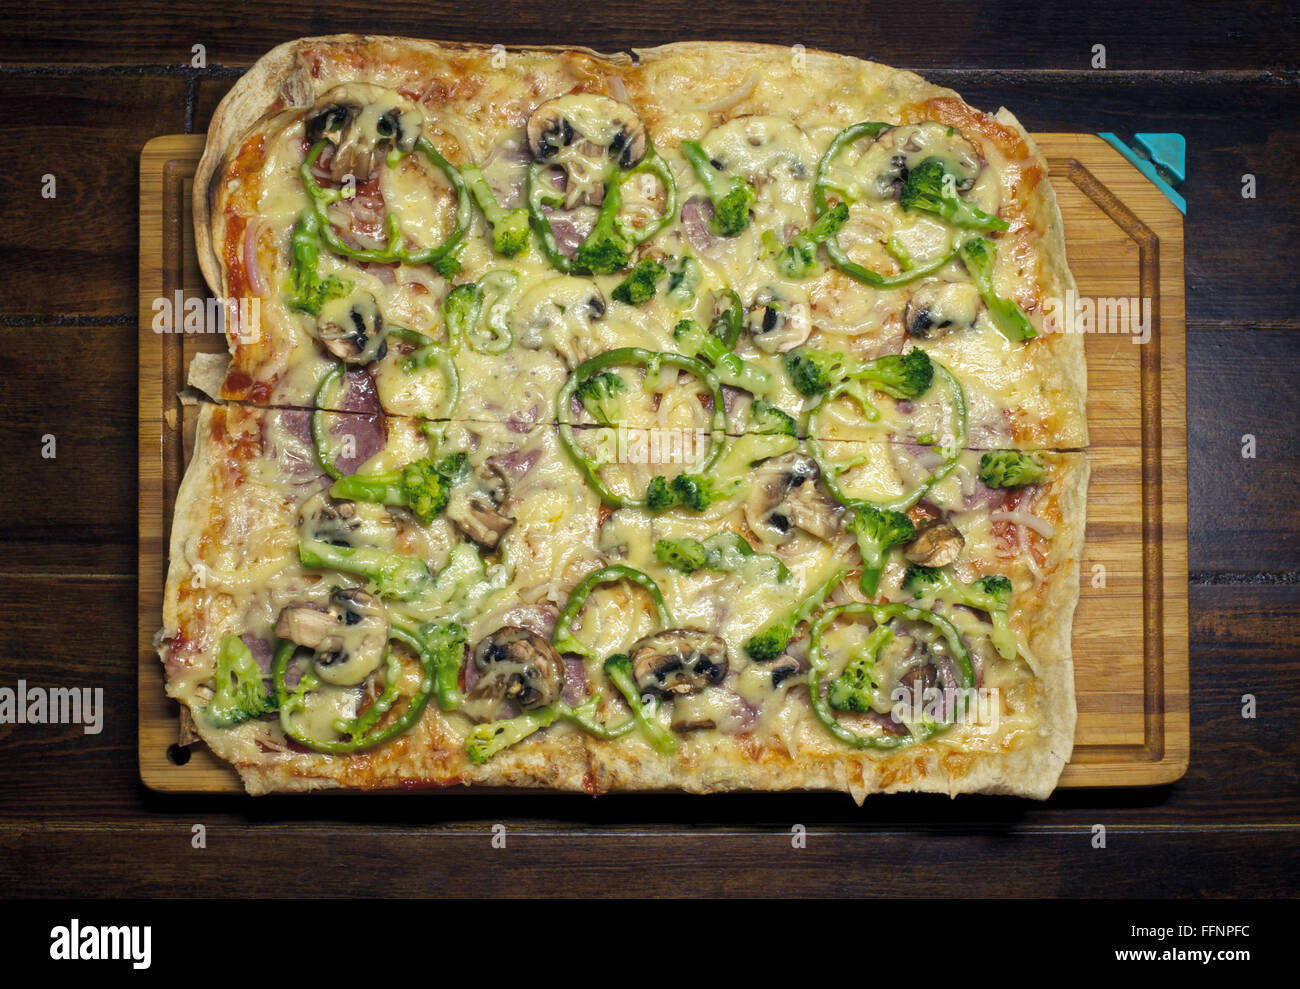 Square homemade pizza on the wooden plate over wooden table Stock Photo